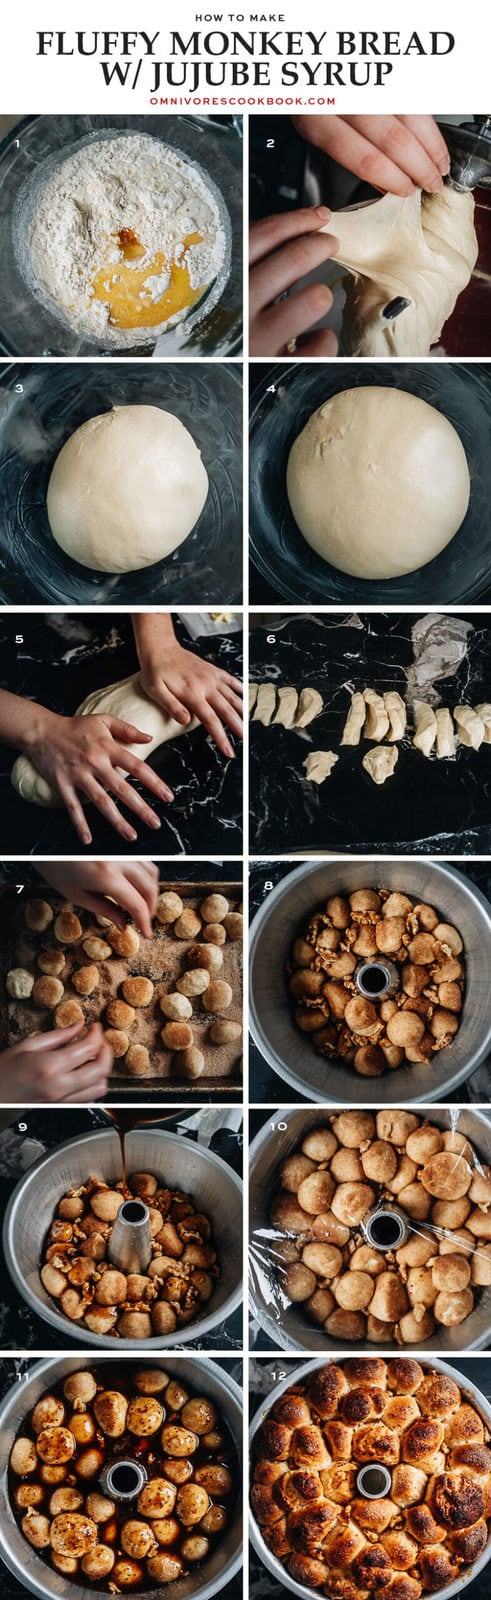 How to make monkey bread step-by-step